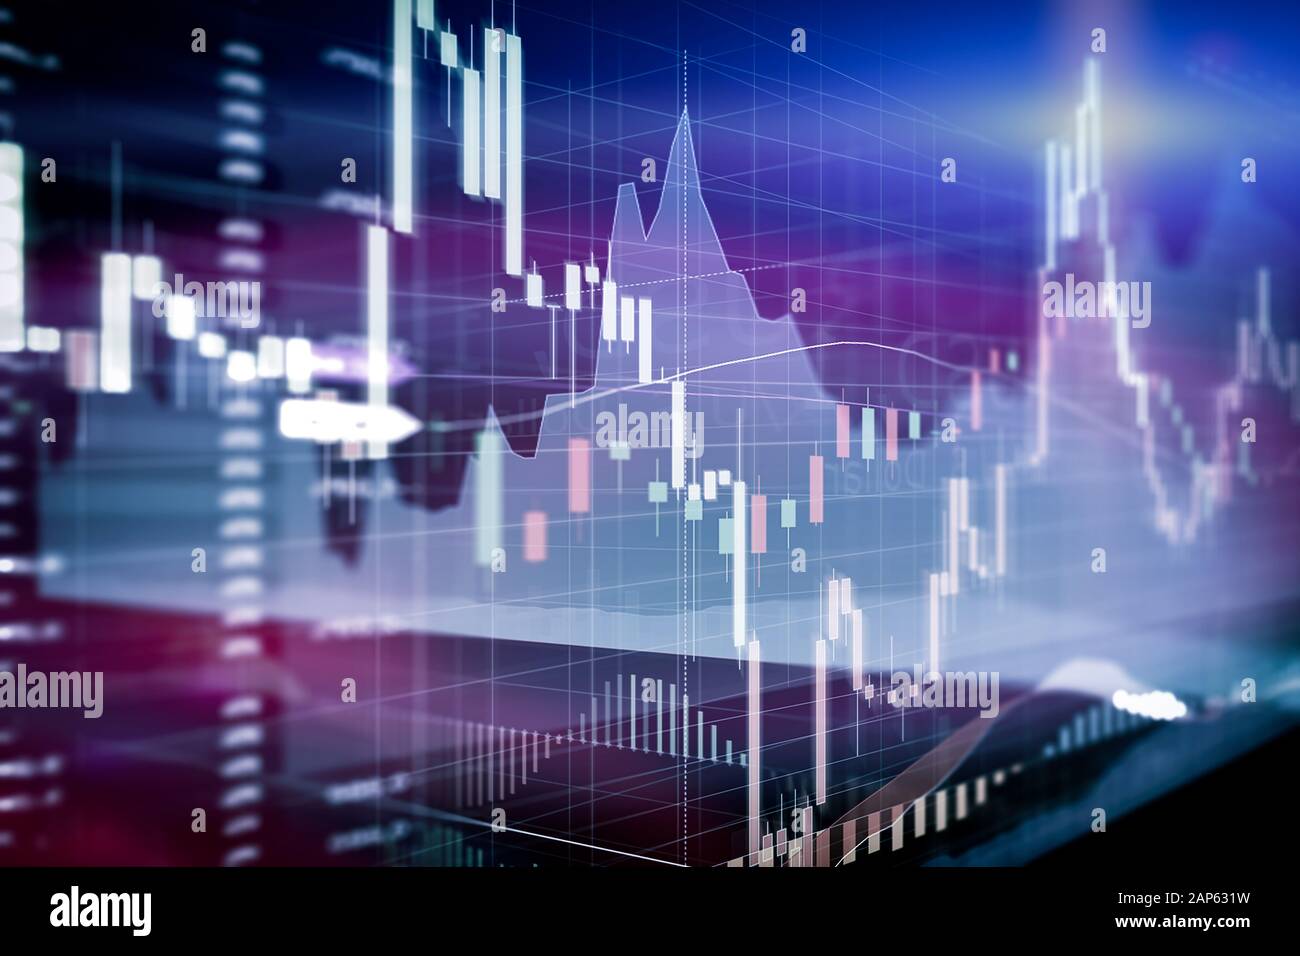 Candle stick graph and bar chart of stock market investment trading. Analysis Forex price display on computer screen. Stock Photo